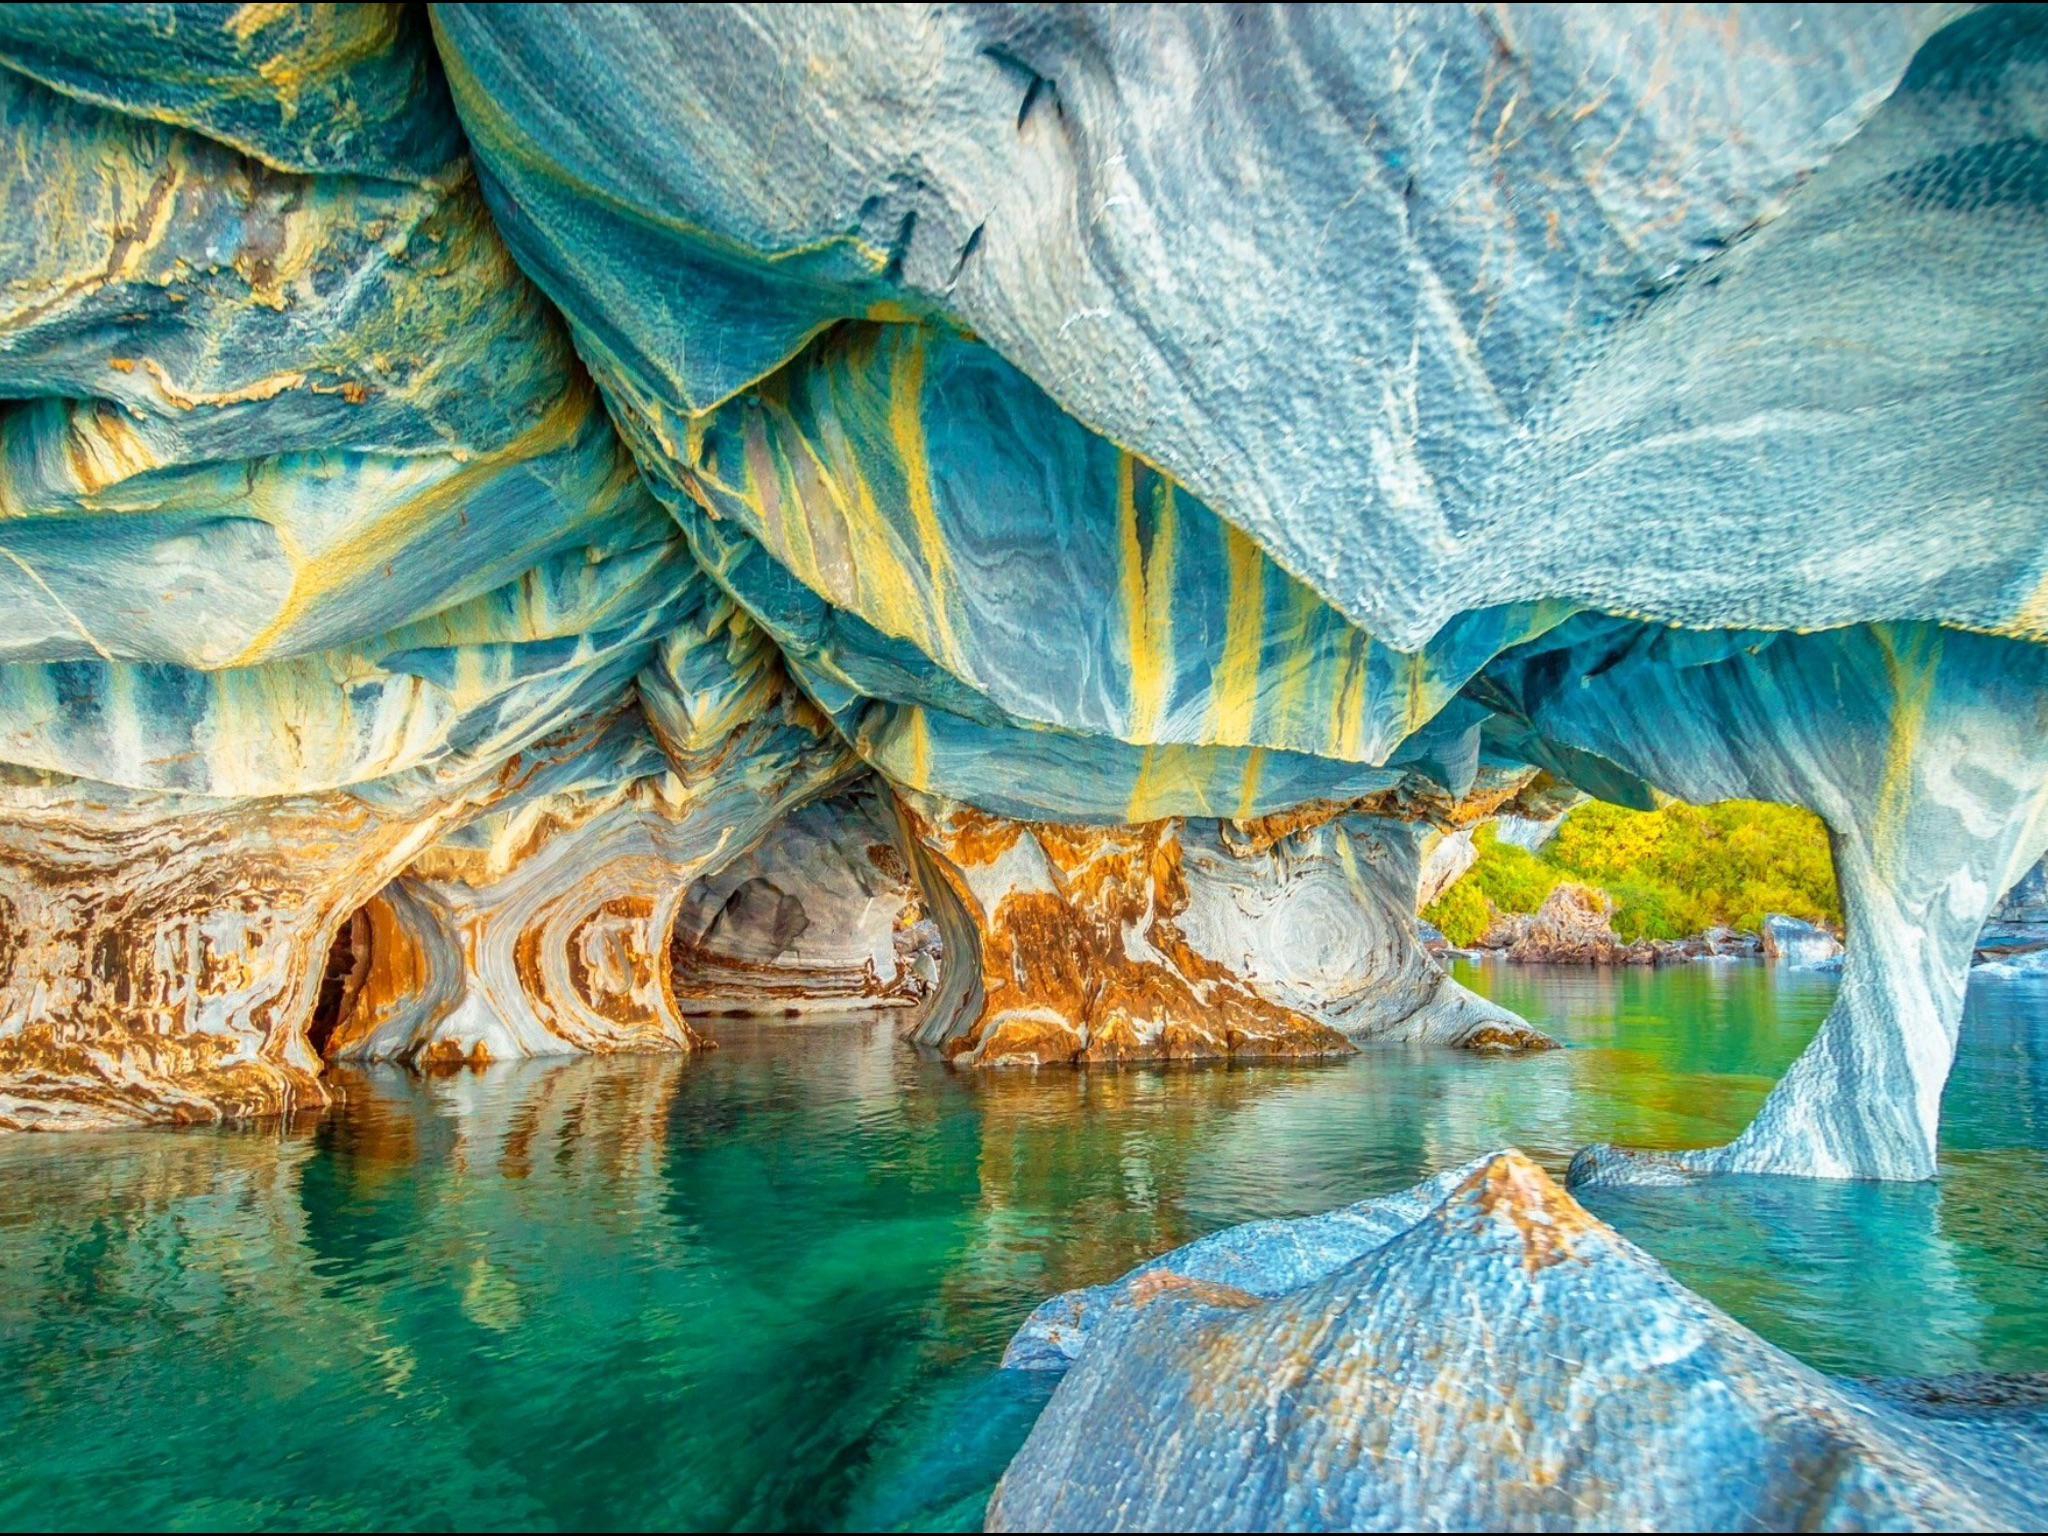 Marble+caves+in+Chile.